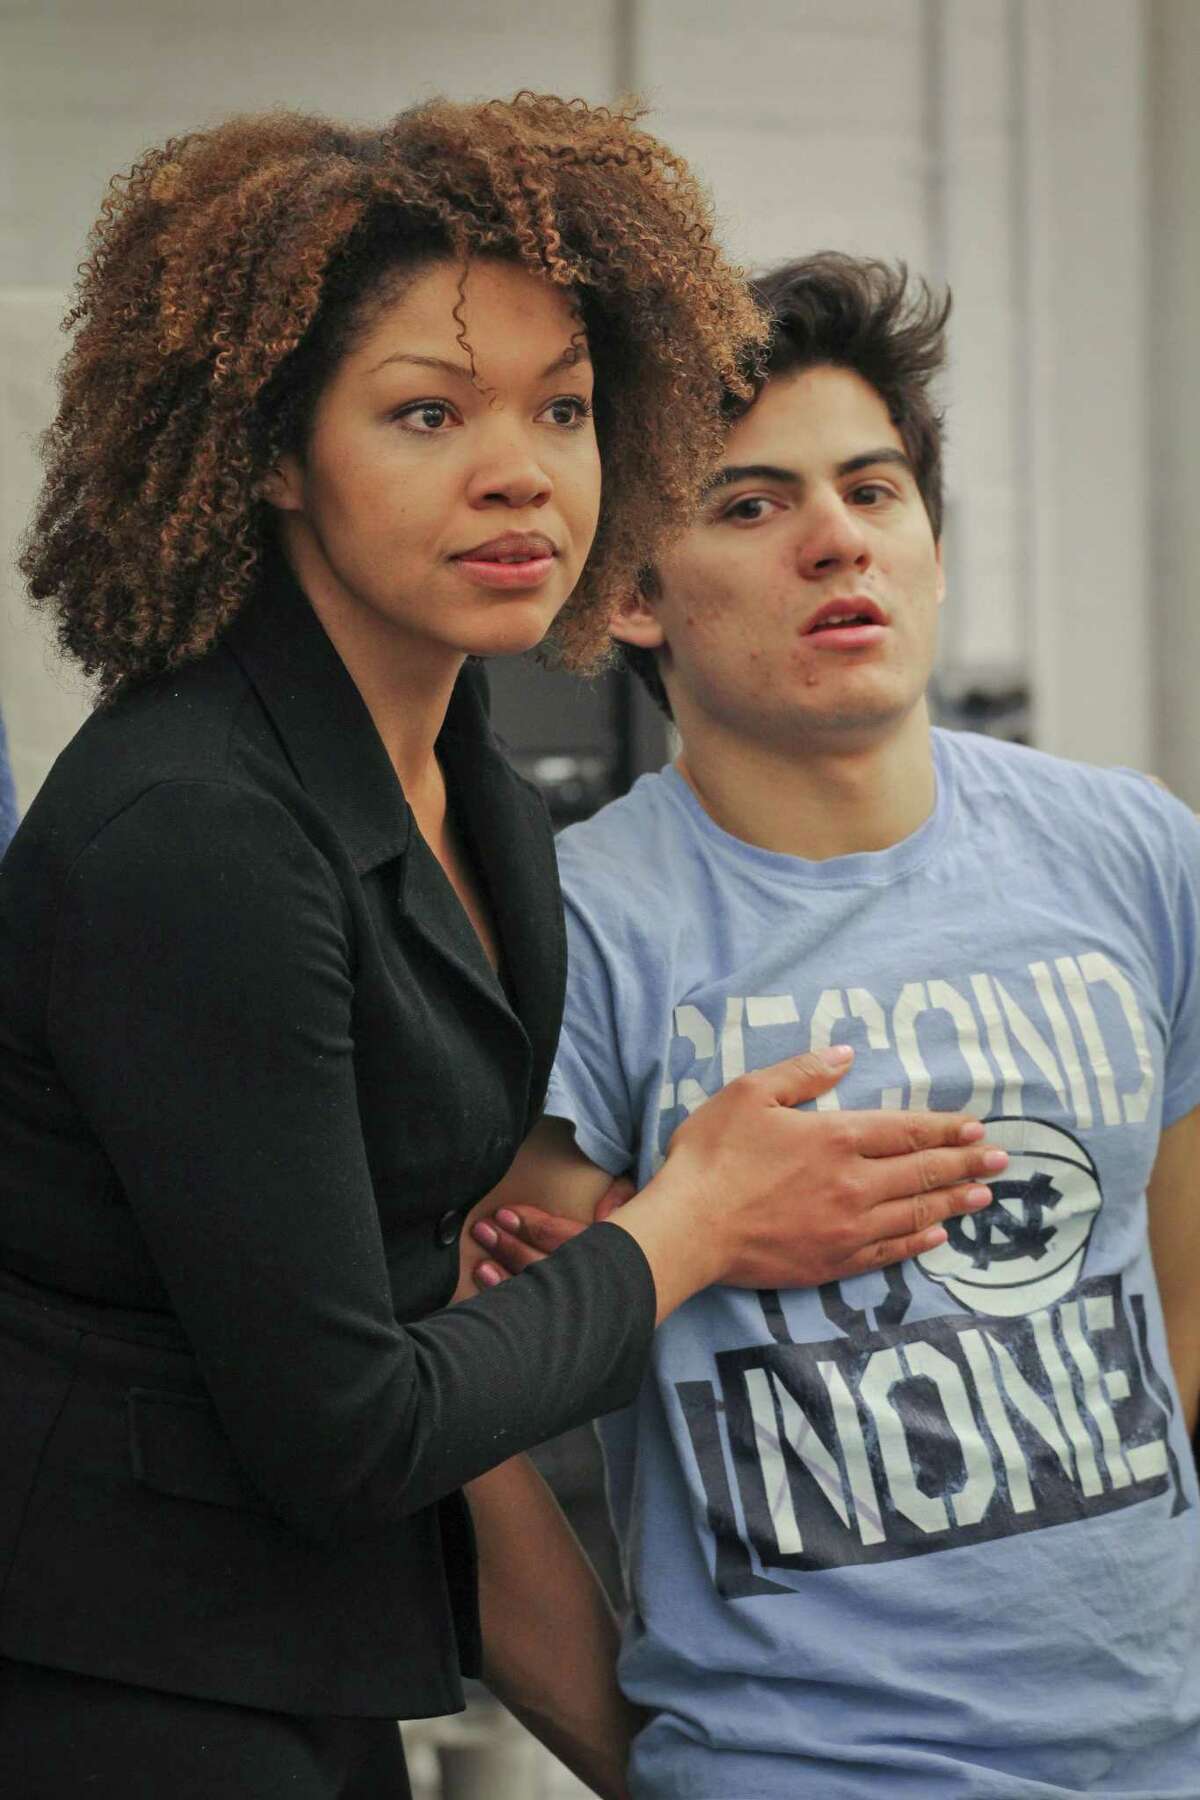 Bradley Tejeda, pictured with cast member Chalia La Tour, received his master’s degree from Yale University, where he appeared in Yale Cabaret’s production of “We Fight We Die.”